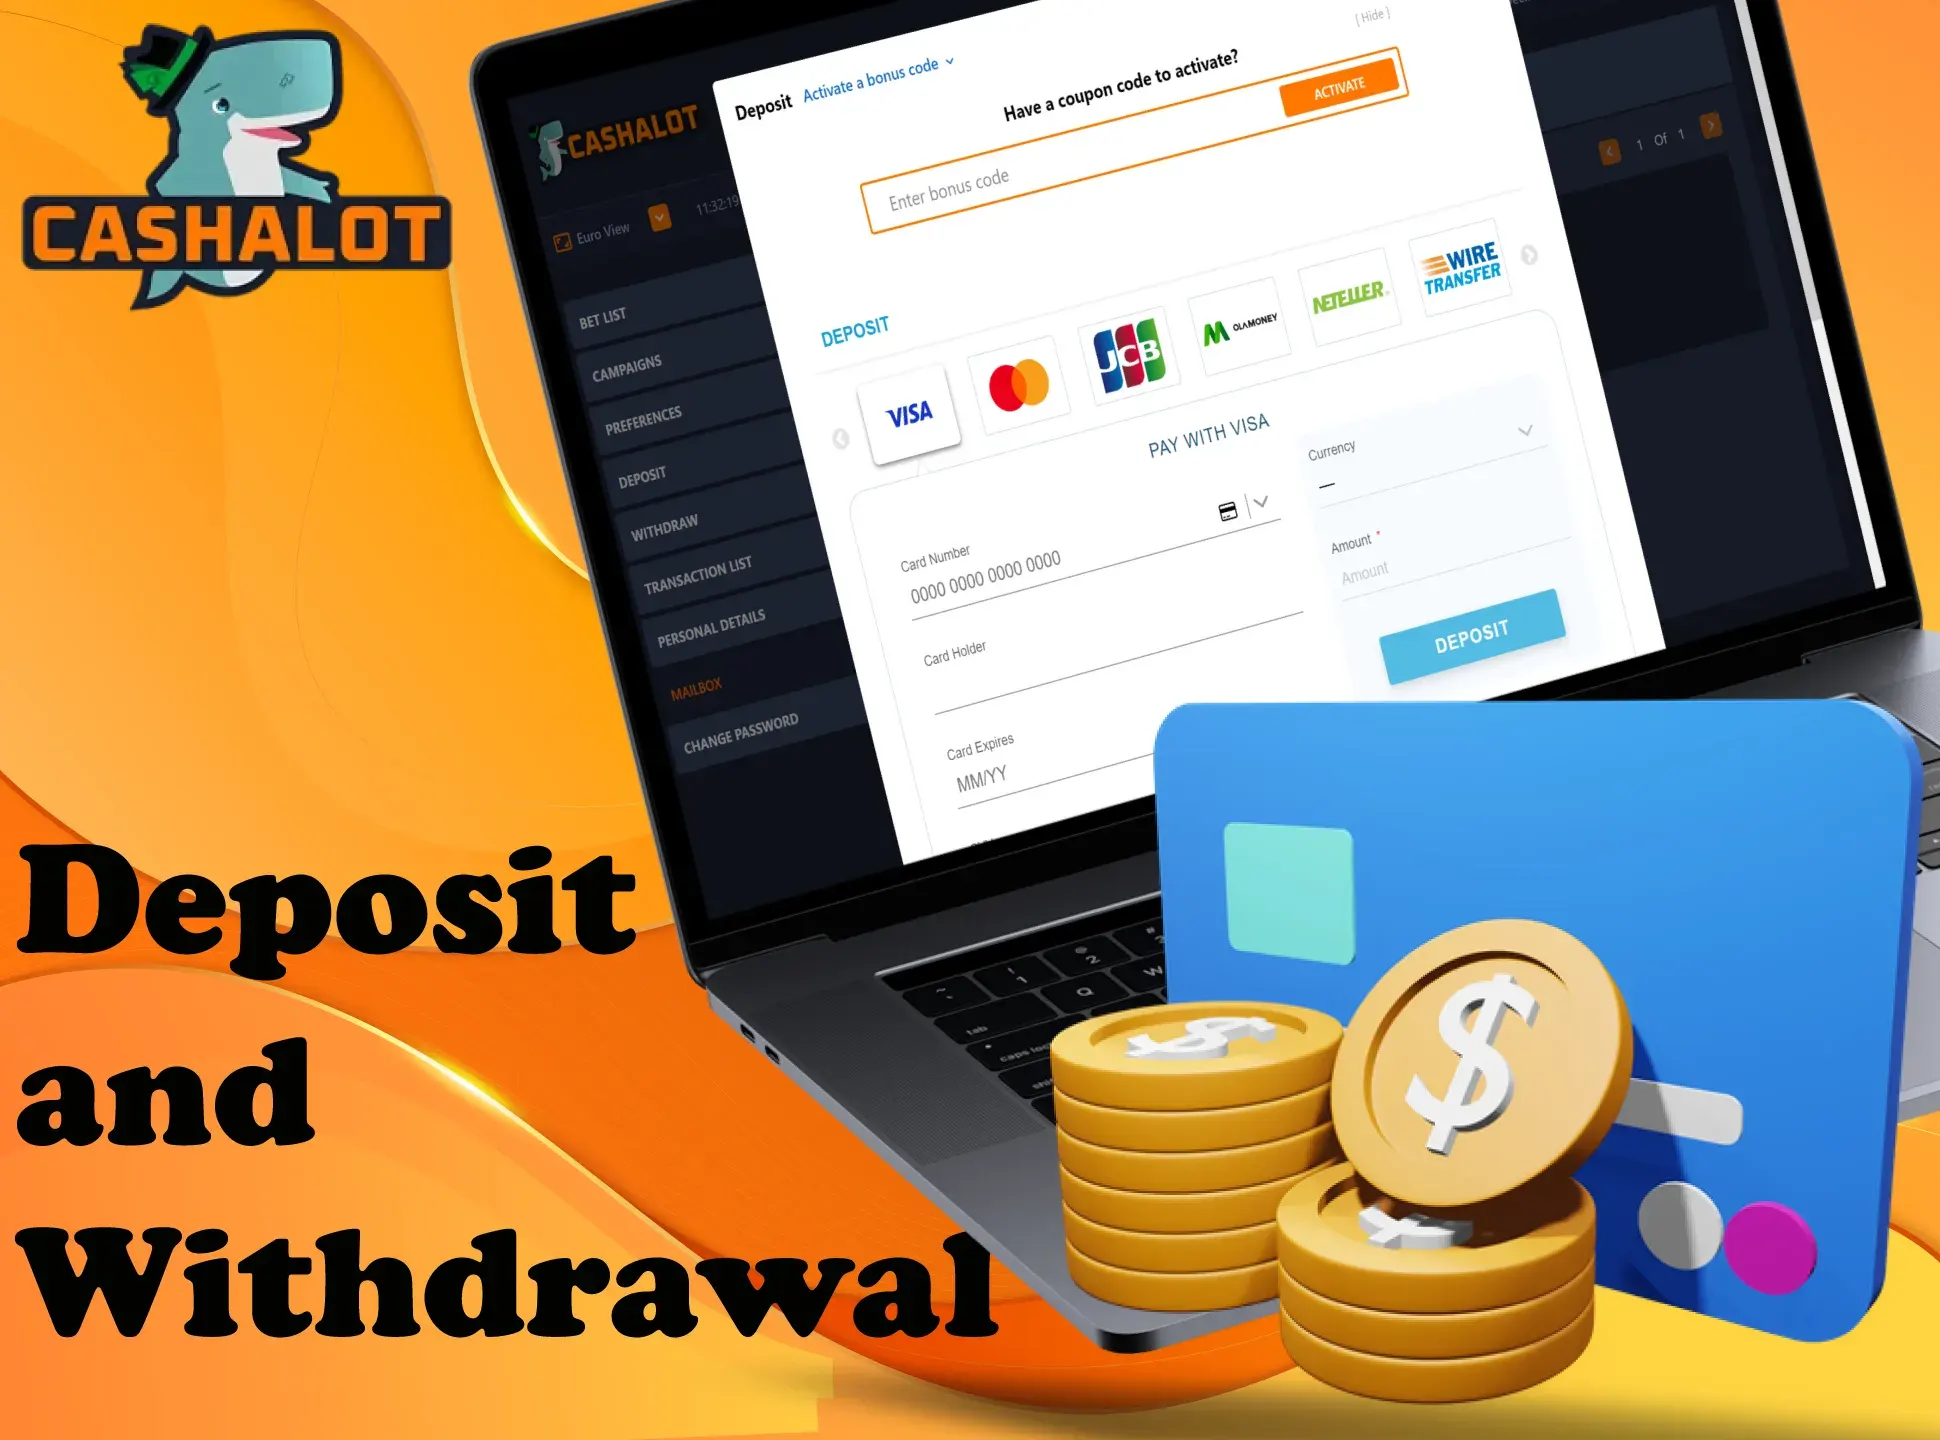 Withdraw money at Cashalot without any problem.